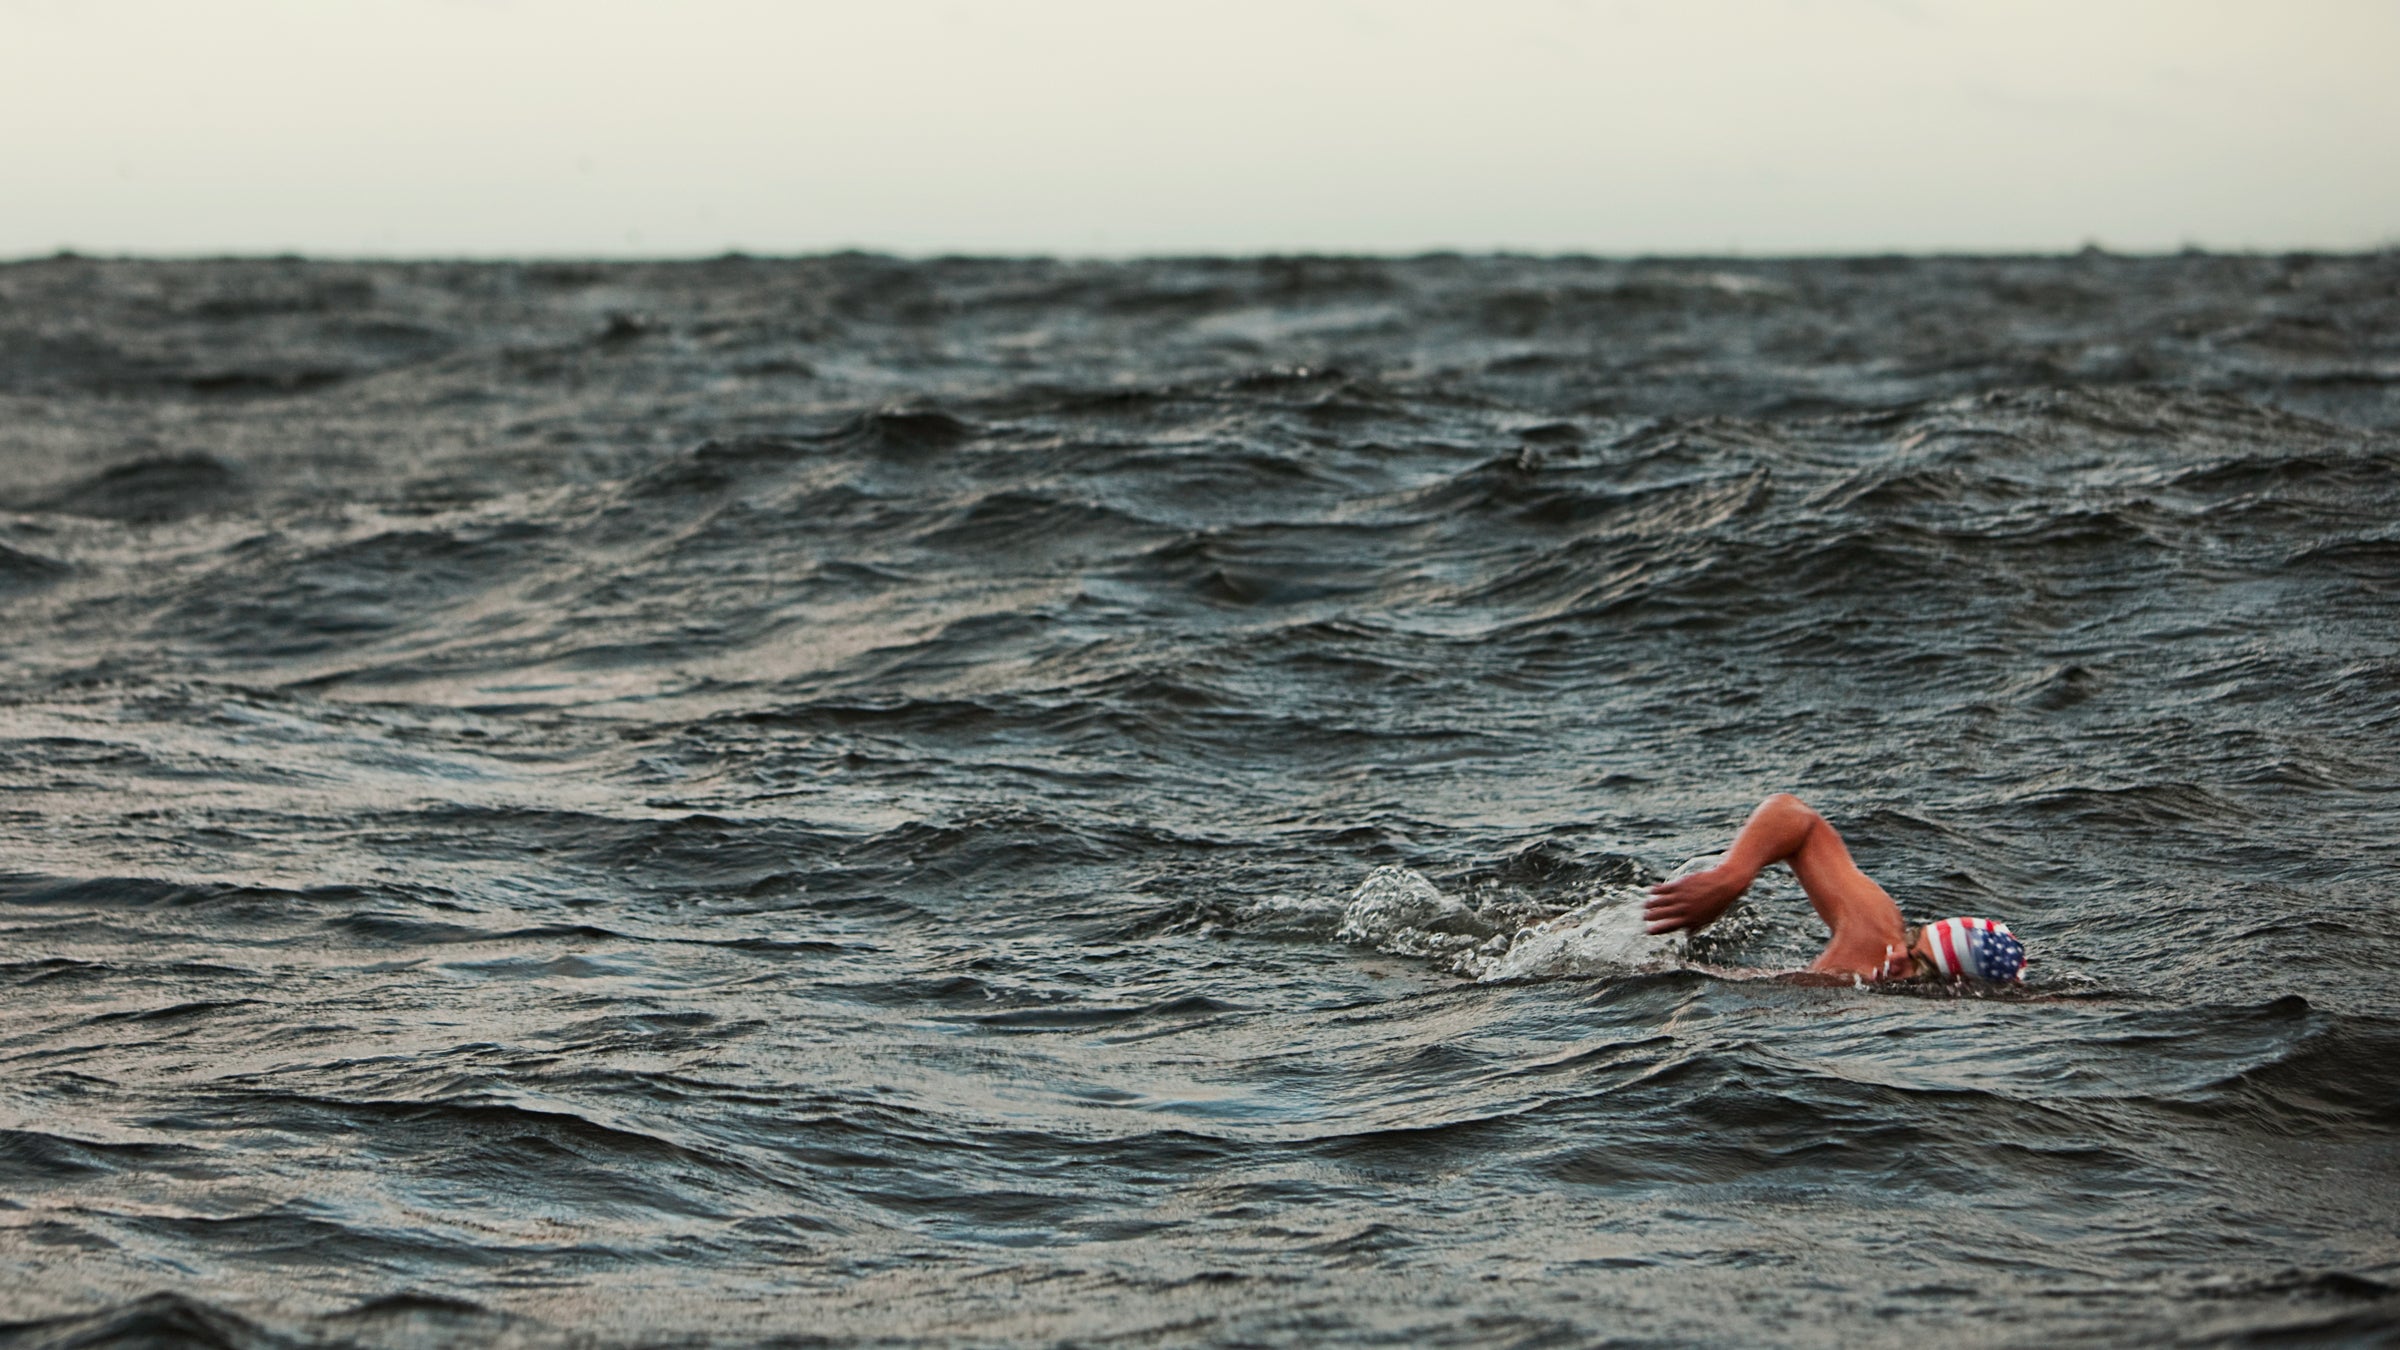 The Beginners Guide to Open-Water Swimming